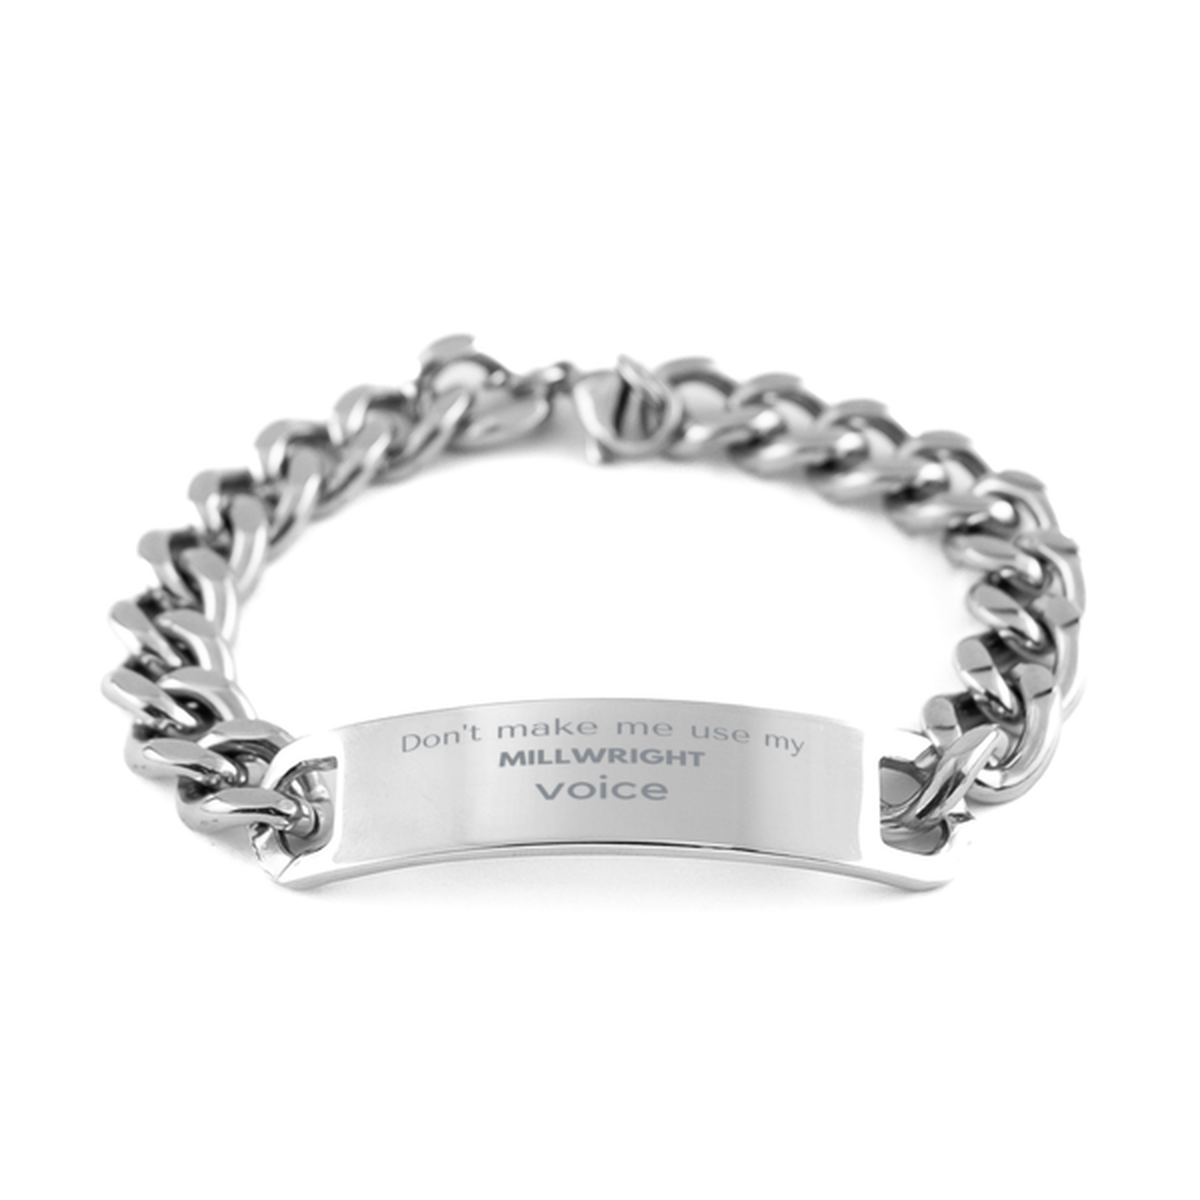 Don't make me use my Millwright voice, Sarcasm Millwright Gifts, Christmas Millwright Cuban Chain Stainless Steel Bracelet Birthday Unique Gifts For Millwright Coworkers, Men, Women, Colleague, Friends